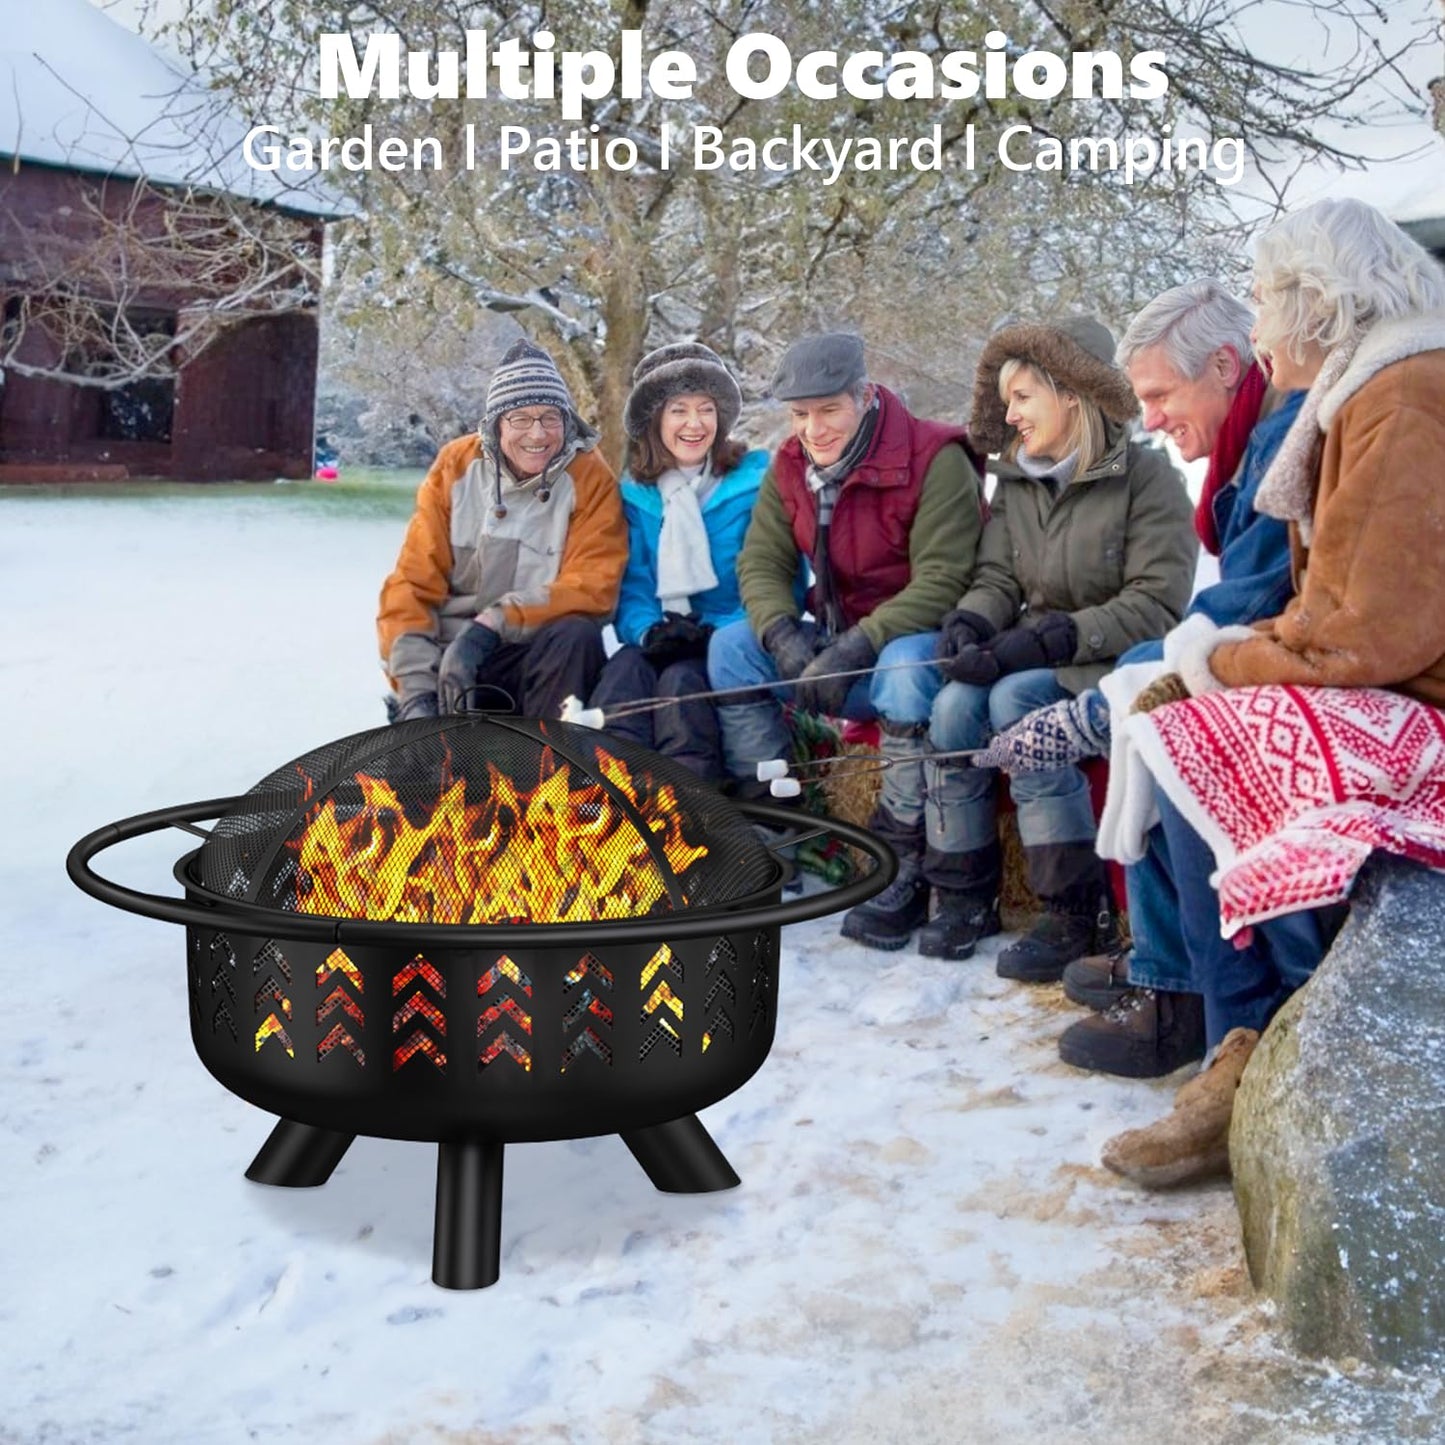 Raxmolo 36 Inch Fire Pit for Outside, Outdoor Wood Burning Firepit Large Steel Firepit Bowl for Garden Patio Backyard Picnic Camping